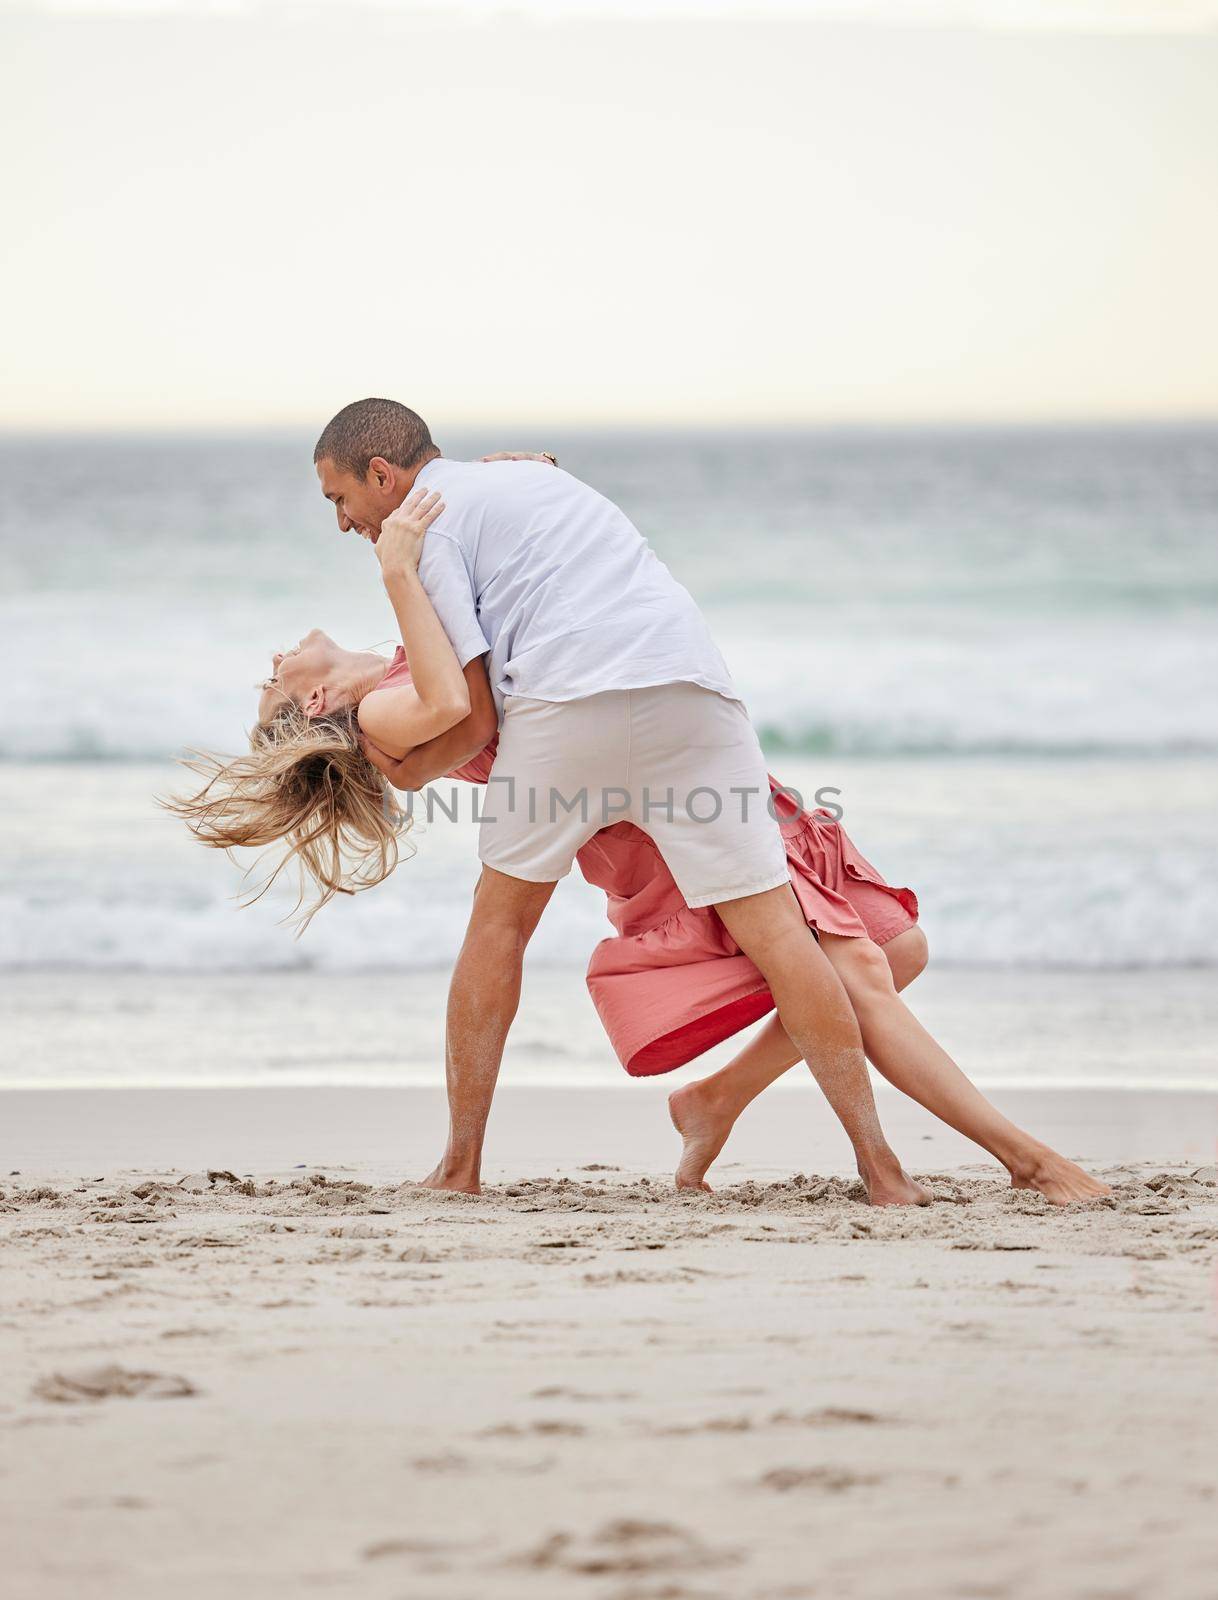 Dancing, happy couple and beach celebrate of love, trust and engagement on romantic luxury holiday travel Bali vacation. Man and woman or dancer couple celebration on sea water, sand and sunset ocean.